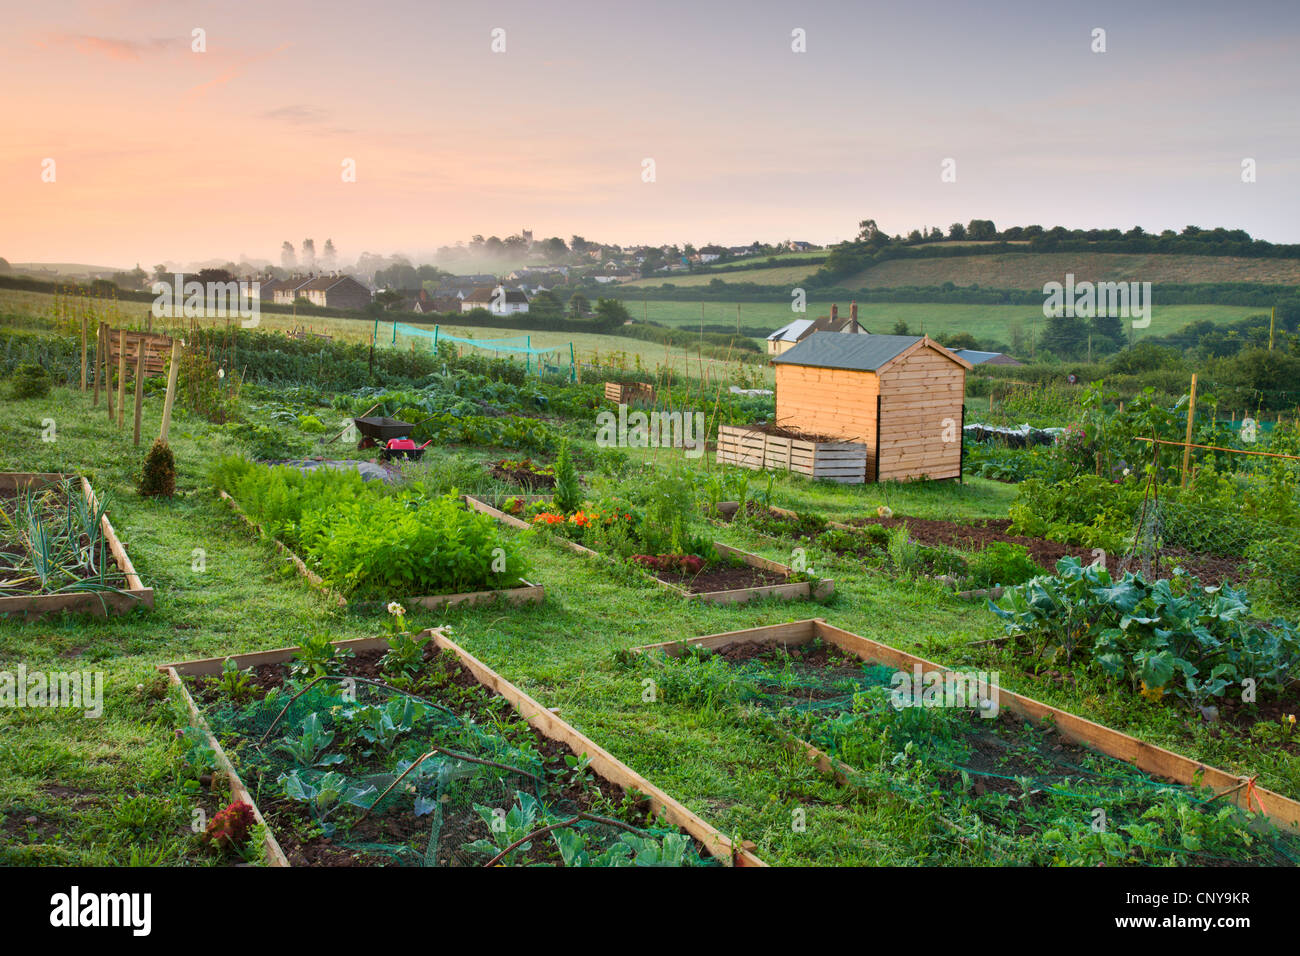 Raised beds on a rural allotment plot on the outskirts of the Mid Devon village of Morchard Bishop, Devon, England. Stock Photo